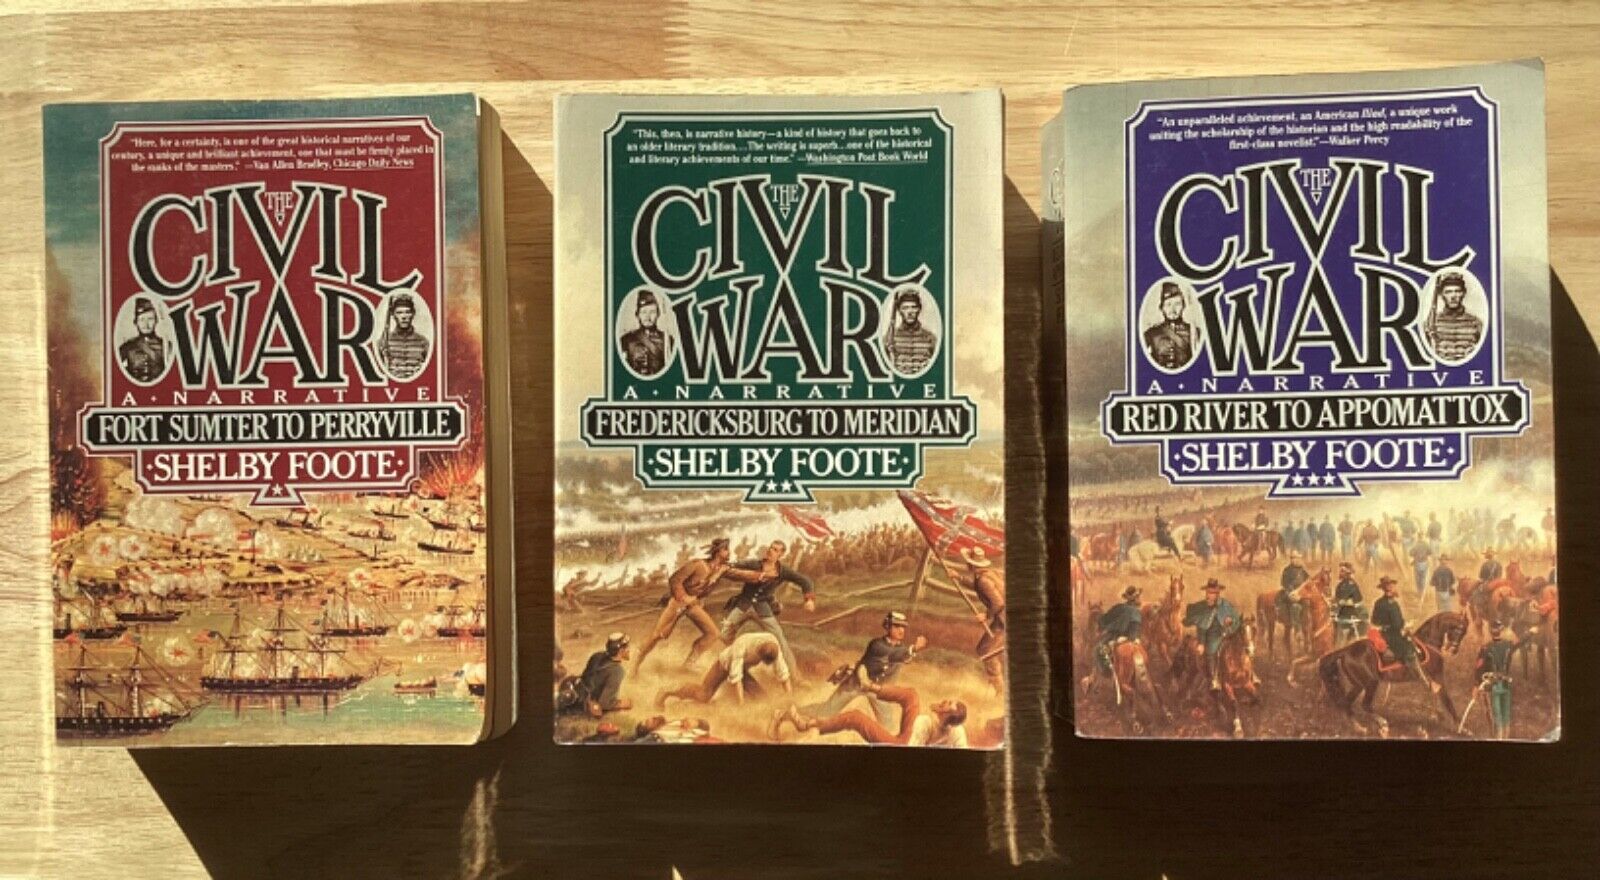 The Civil War: A Narrative Volumes 1-3, 1st Vintage Books edition, Shelby Foote